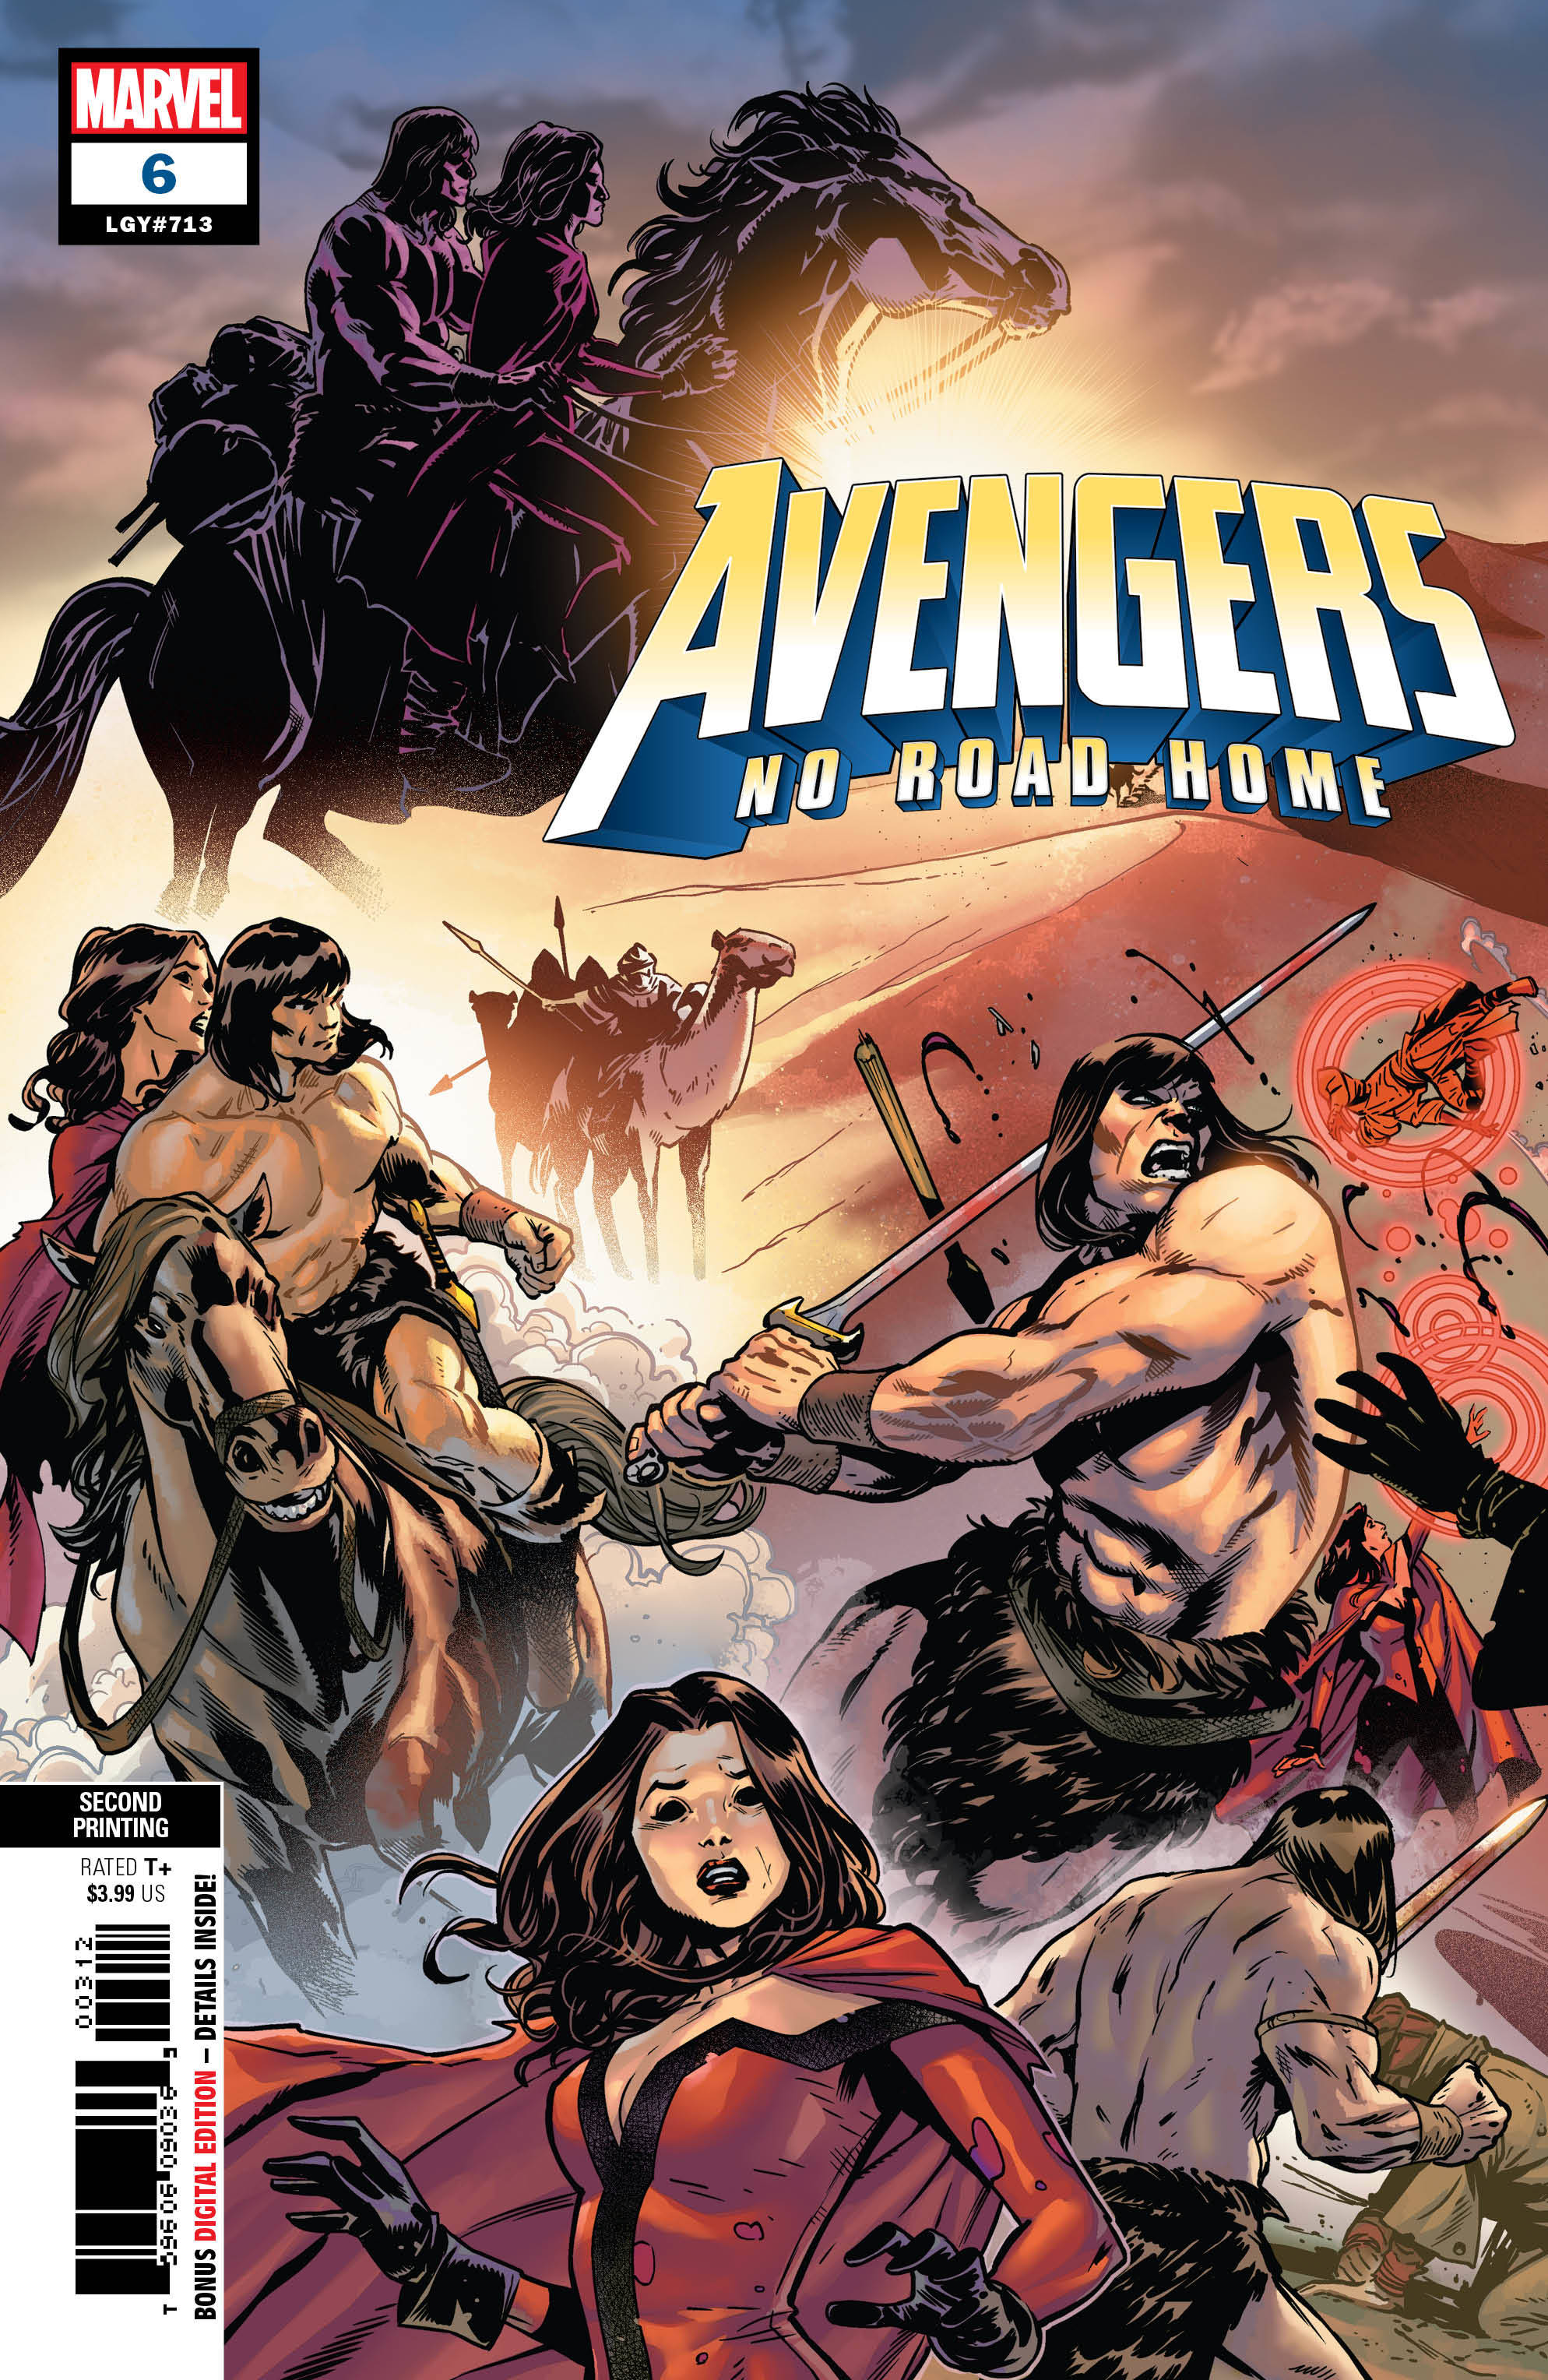 AVENGERS NO ROAD HOME #6 (OF 10) 2ND PTG IZAAKSE VARIANT 04/24/19